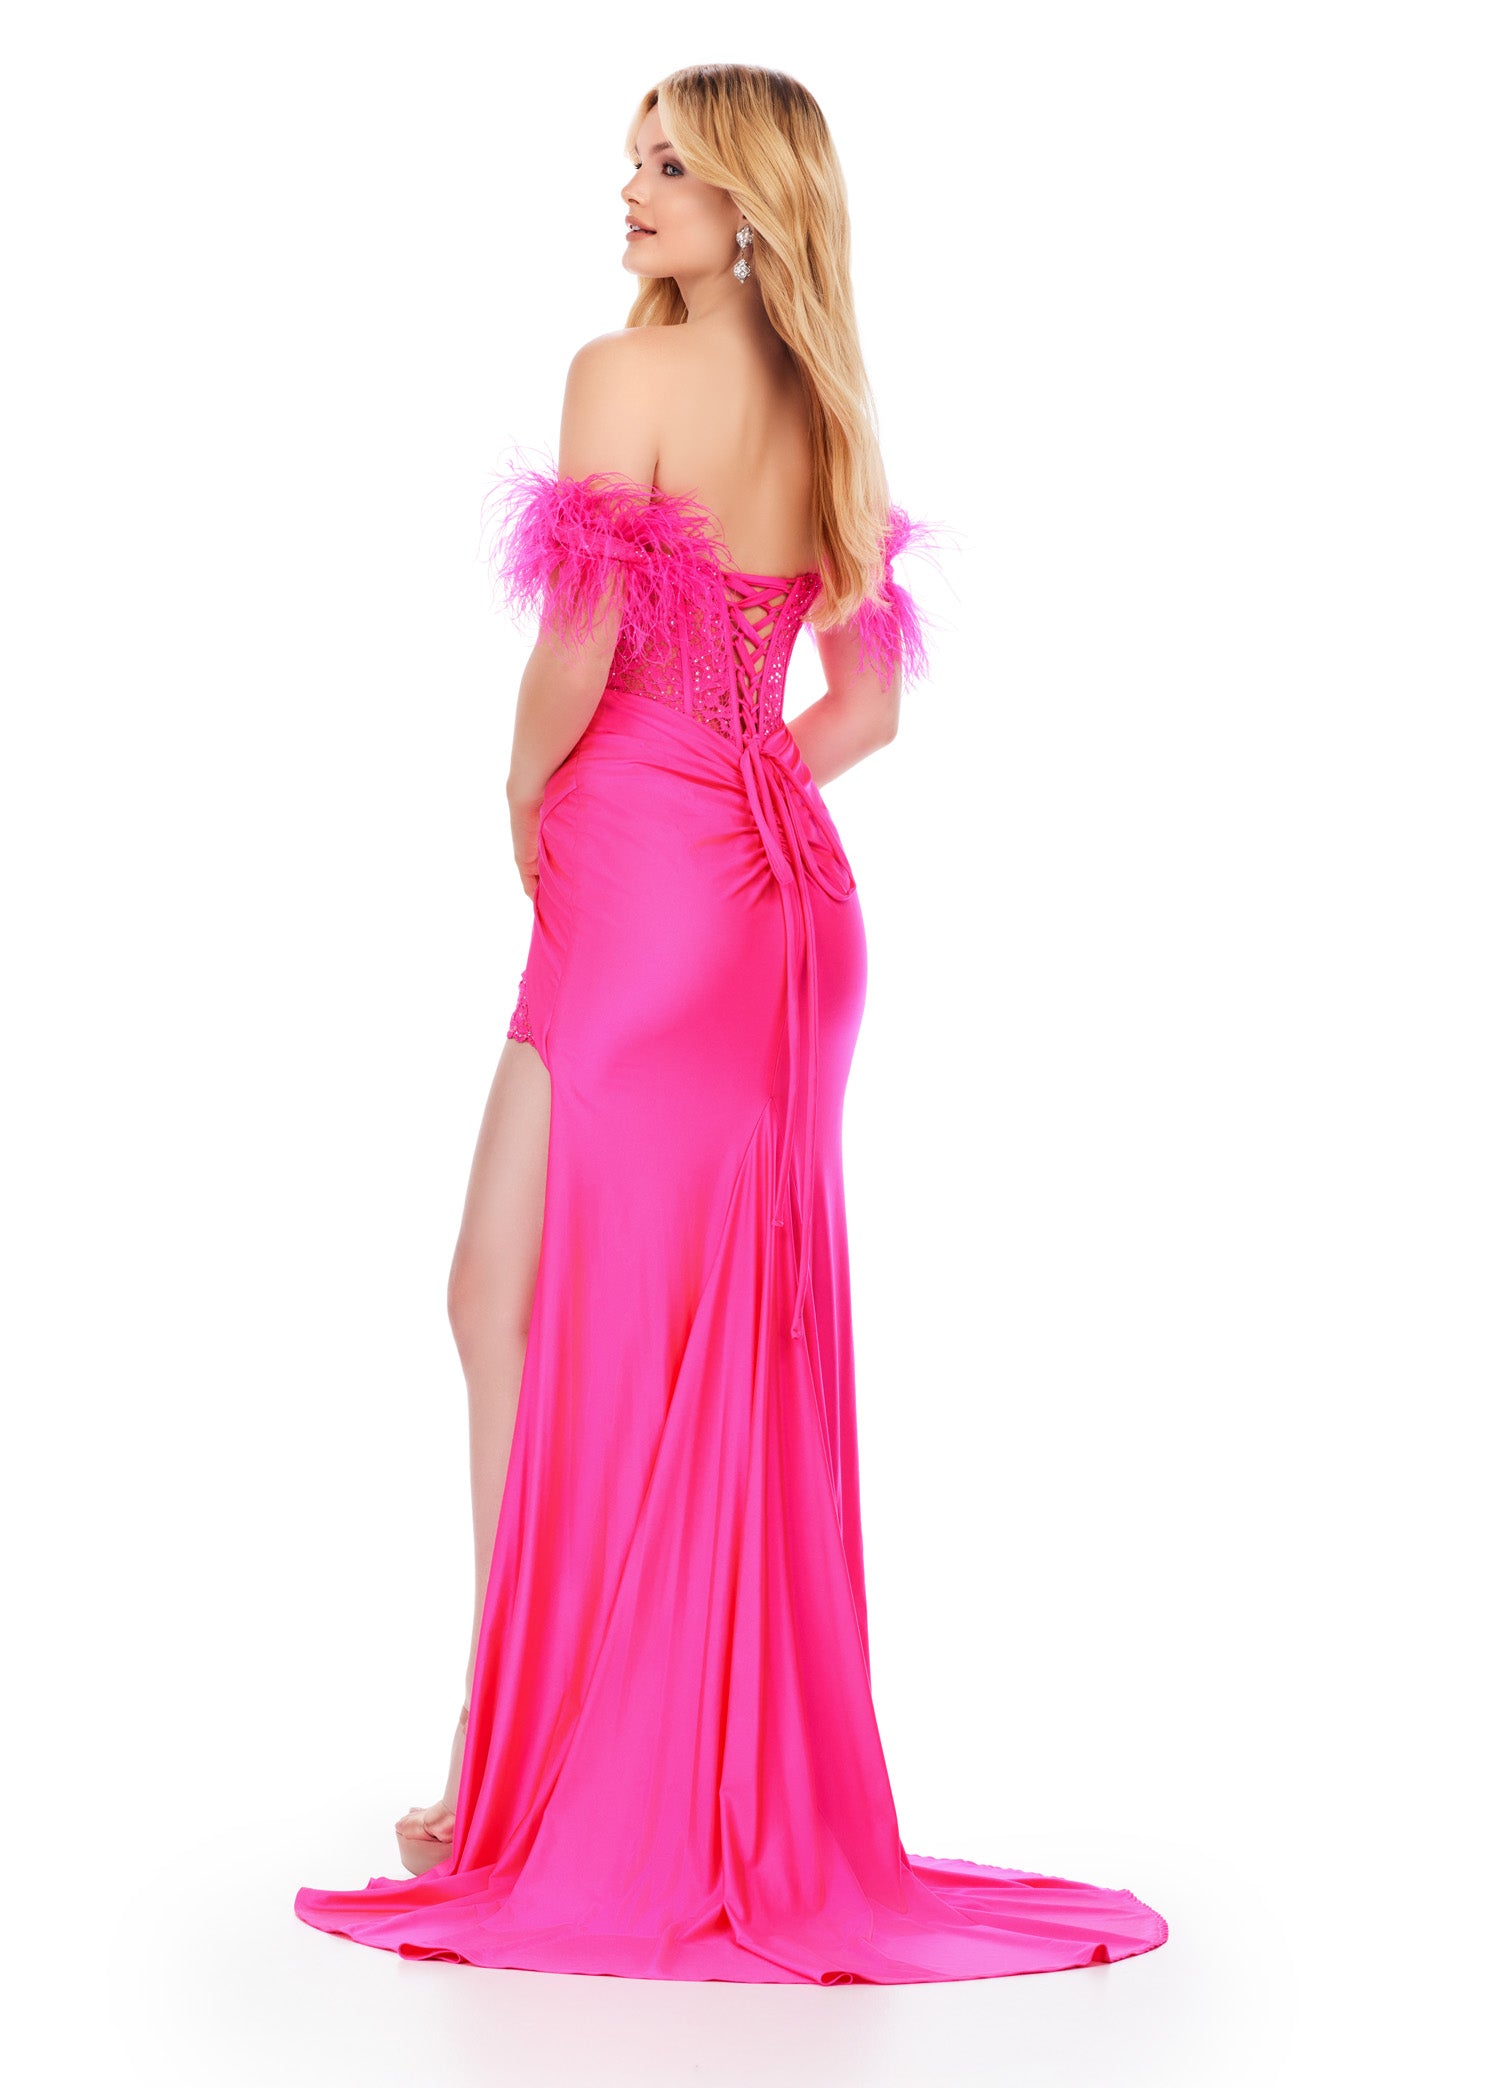 Stay on-trend with the Ashley Lauren 11618 Long Prom Dress. Featuring a corset, off-shoulder design, and intricate lace applique, this formal gown exudes elegance. The feather straps add a touch of whimsy, while the slit allows for effortless movement. Perfect for prom or pageants. Slay the night away in this fabulous embroidered jersey gown. This dress features a corset bustier with a lace up back and off shoulder feather straps.